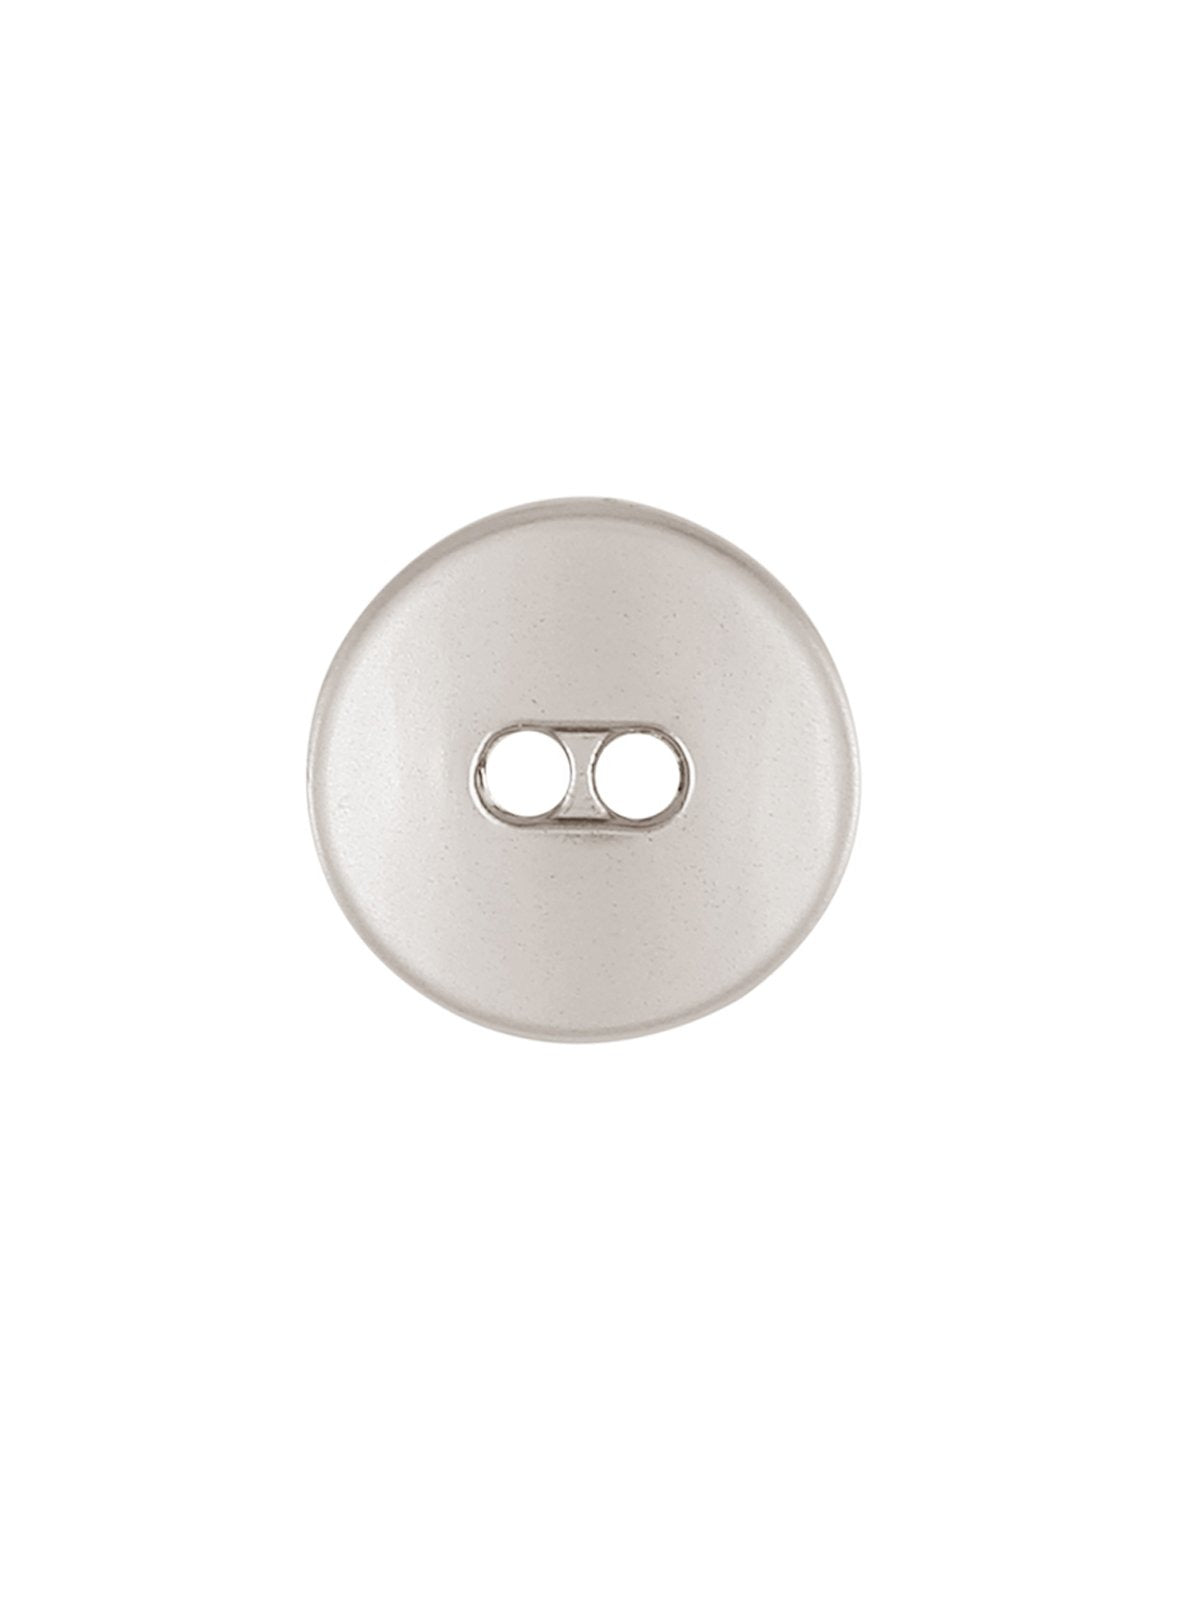 Fashionable Round Shape with Curvy Structure Metal Button in Matte Silver Color